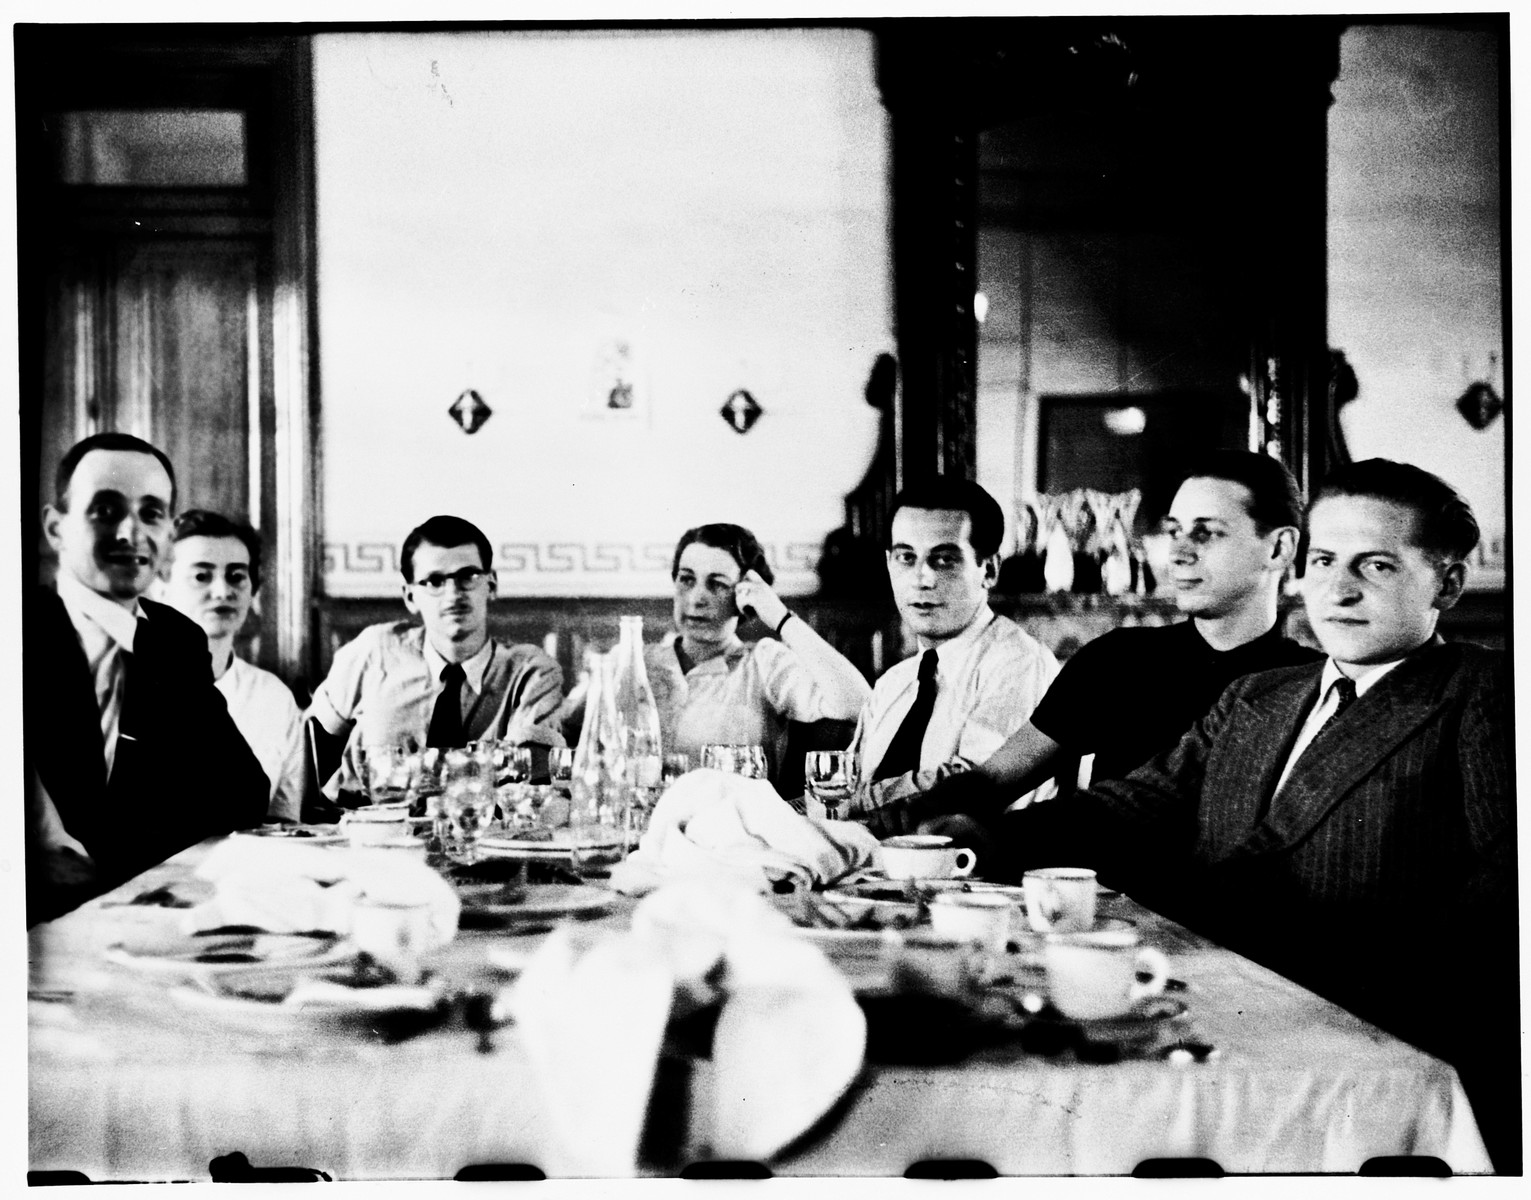 Members of the Centre Americain de Secours attend a farewell dinner at the Cerbere train station.

Seated from left to right are Jacques Weisslitz, Theodora Ungemacht Benedite, Daniel Benedite, Lucie Heymann, Louis Coppermann, Marcel Verzeanu, and Jean Gemahling.